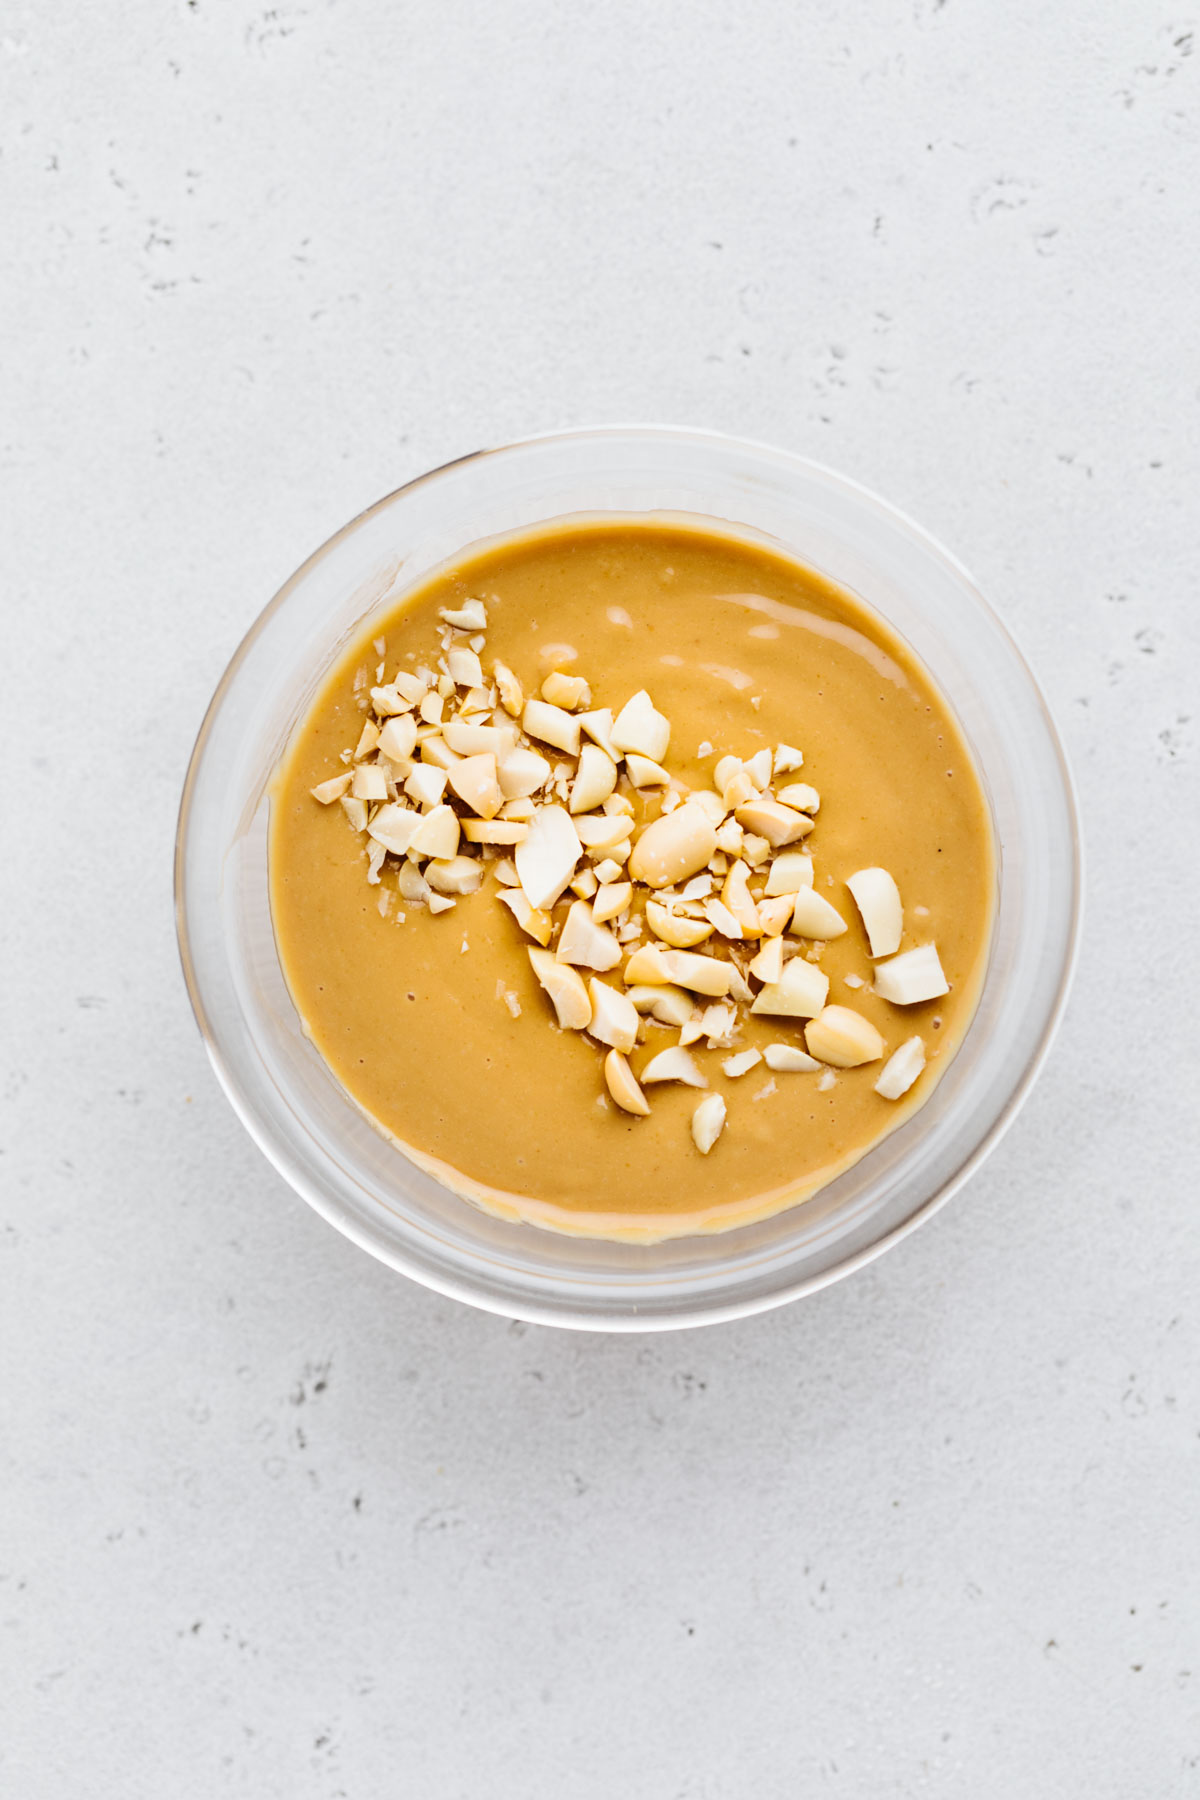 A small glass bowl on a grey backdrop with creamy peanut sauce and garnished with chopped peanuts